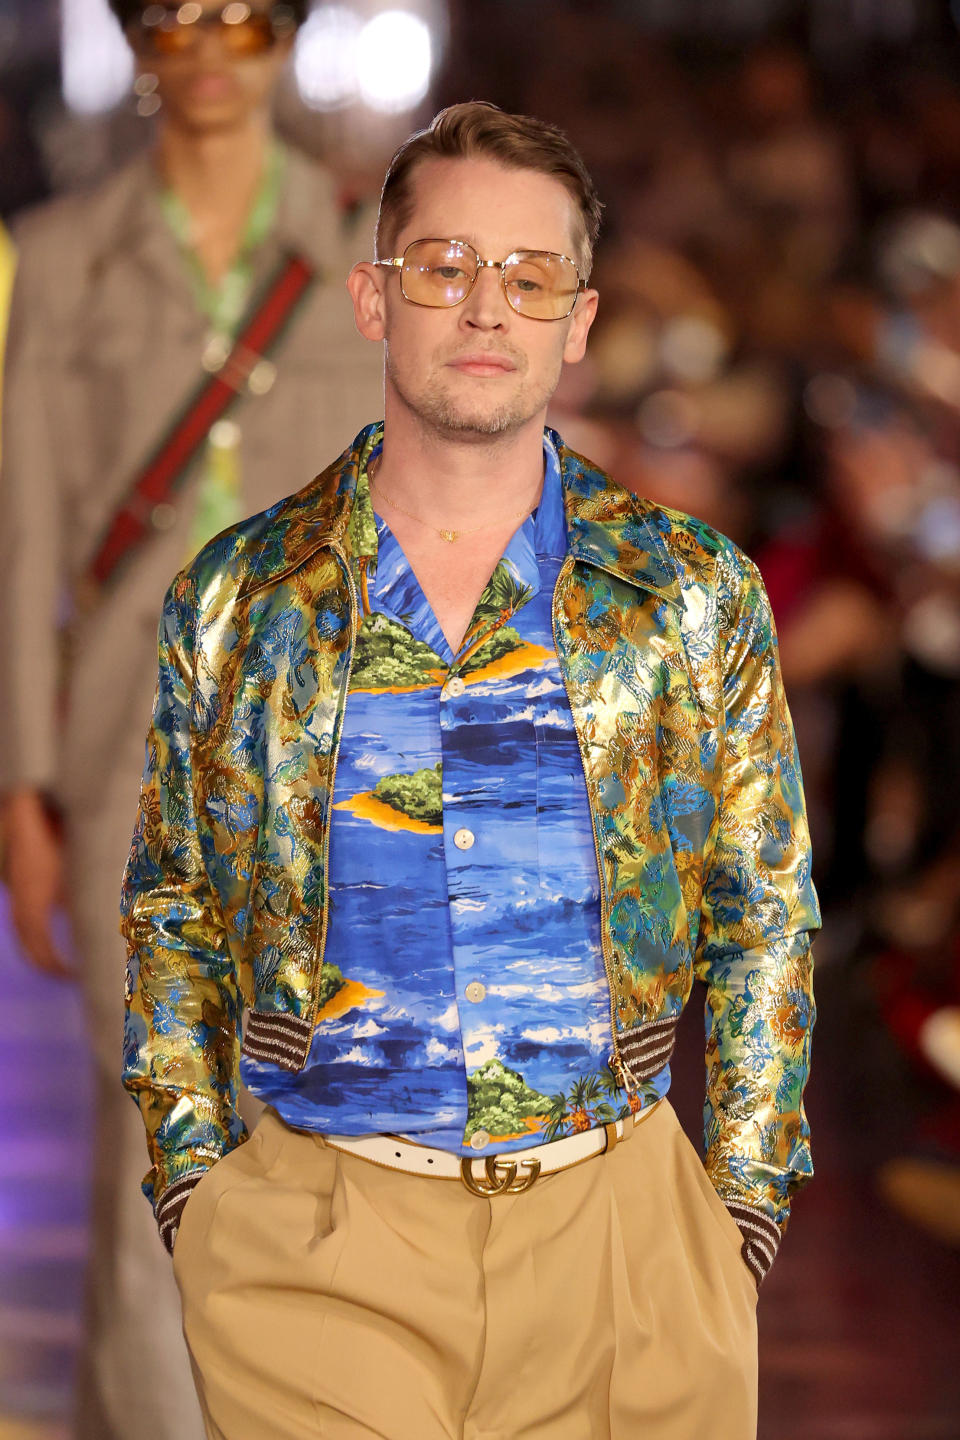 Macaulay on Prada runway, wearing a bomber jacket in the colours of a peacock's tail over a blue shirt with the sea and several small islands on it, and camel colored trousers.